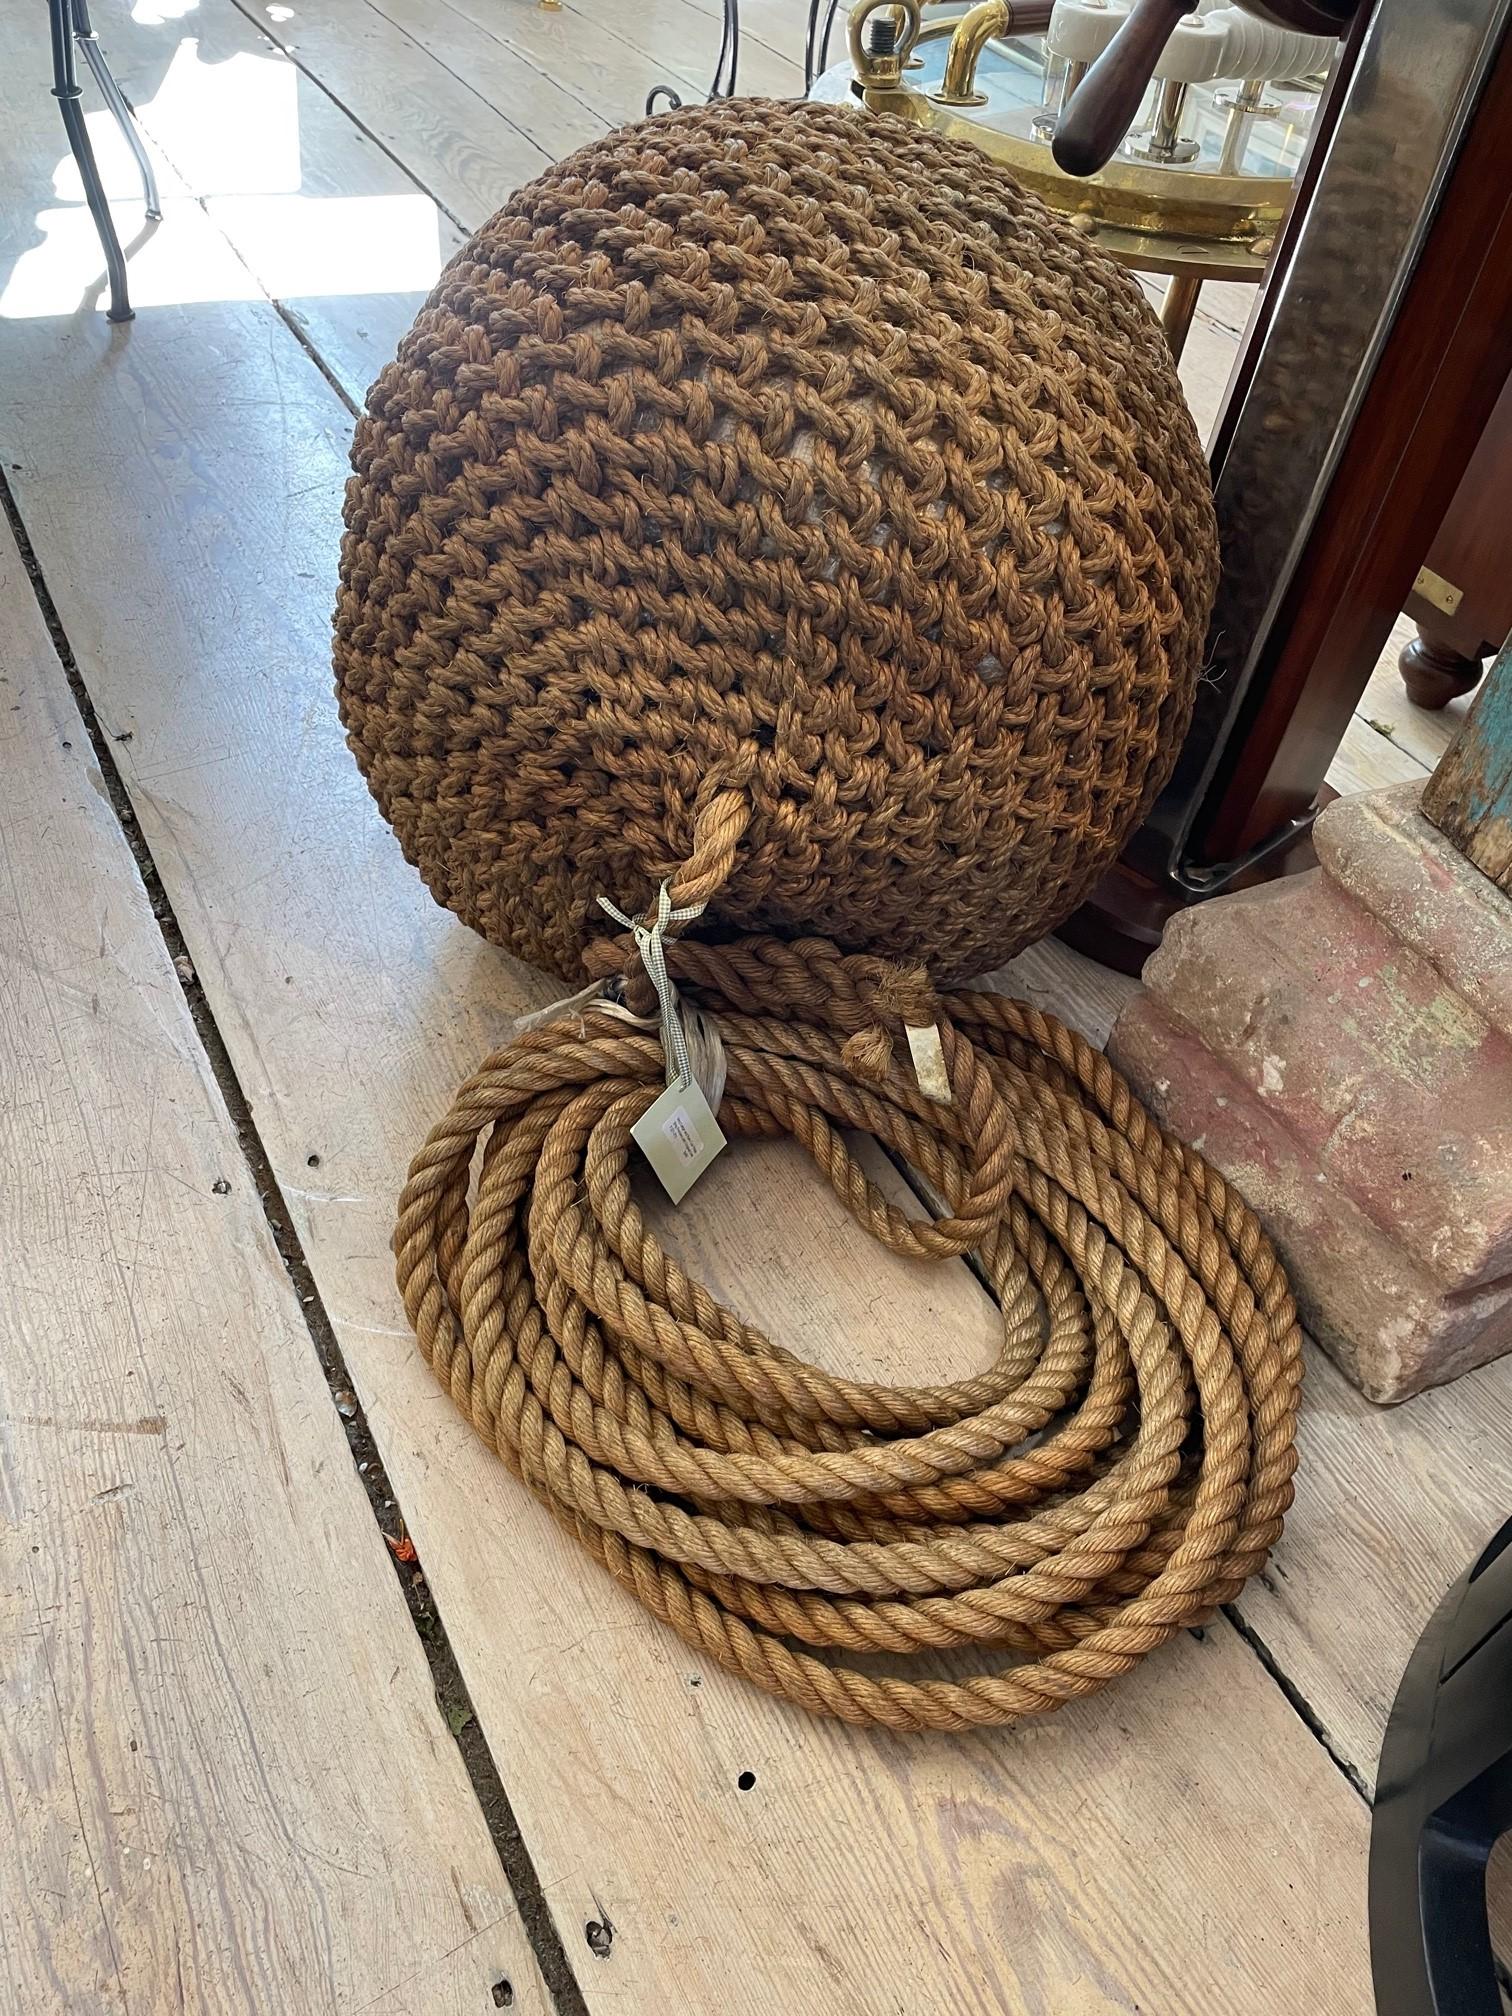 Rustic Large Coir Rope Ship Fender to Use as Stool or Foot Rest